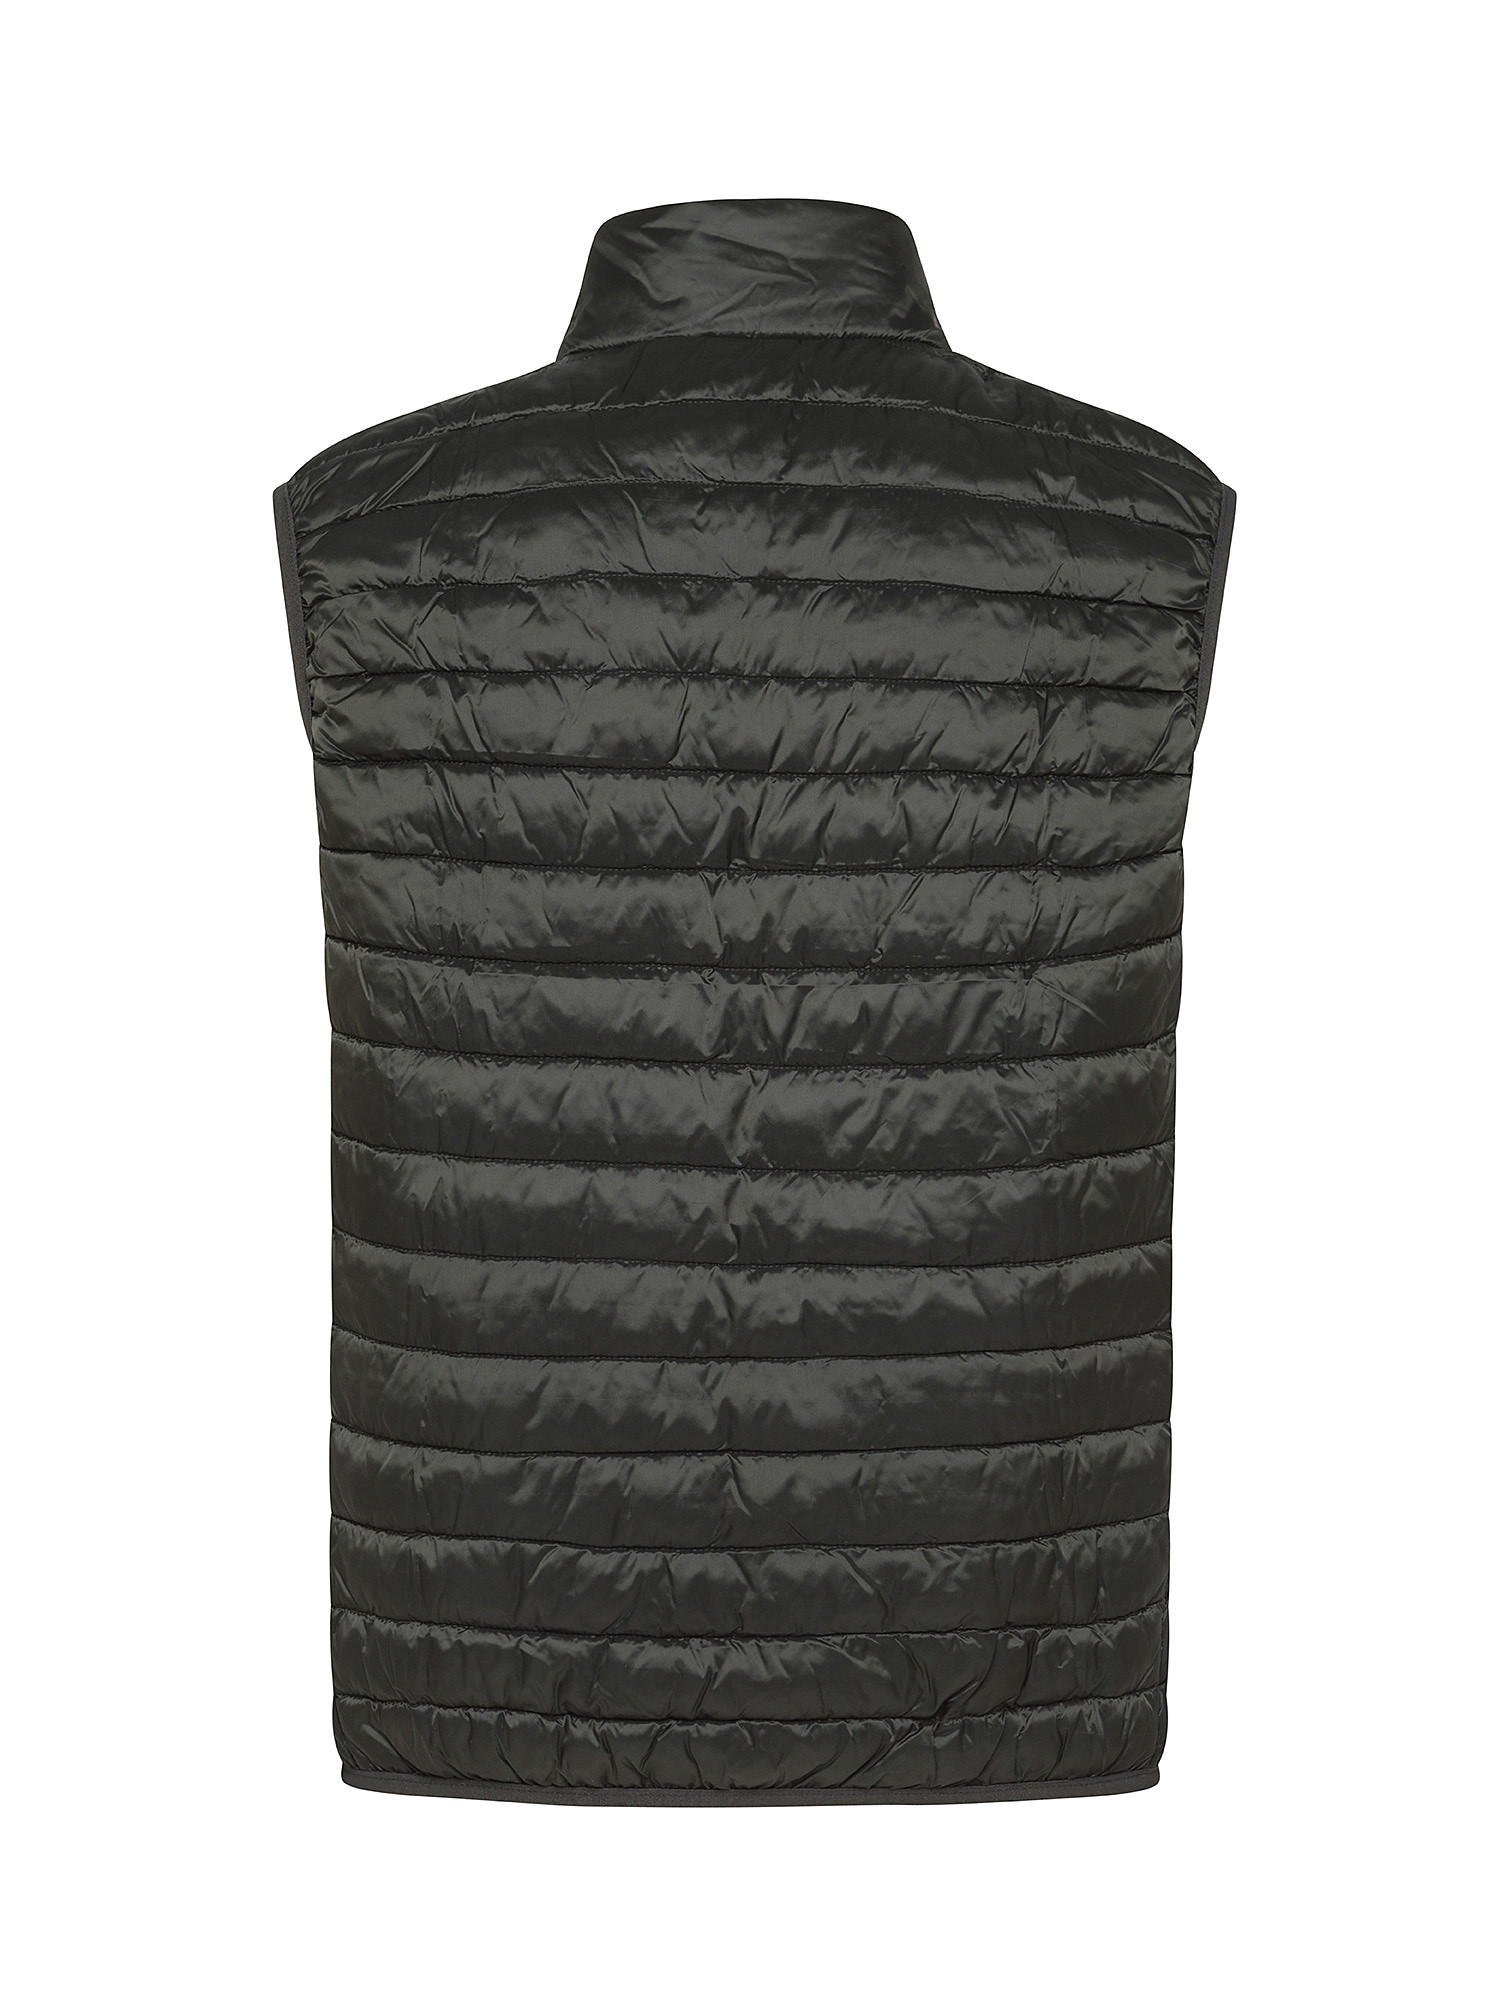 JCT - Quilted sleeveless down jacket, Dark Green, large image number 1